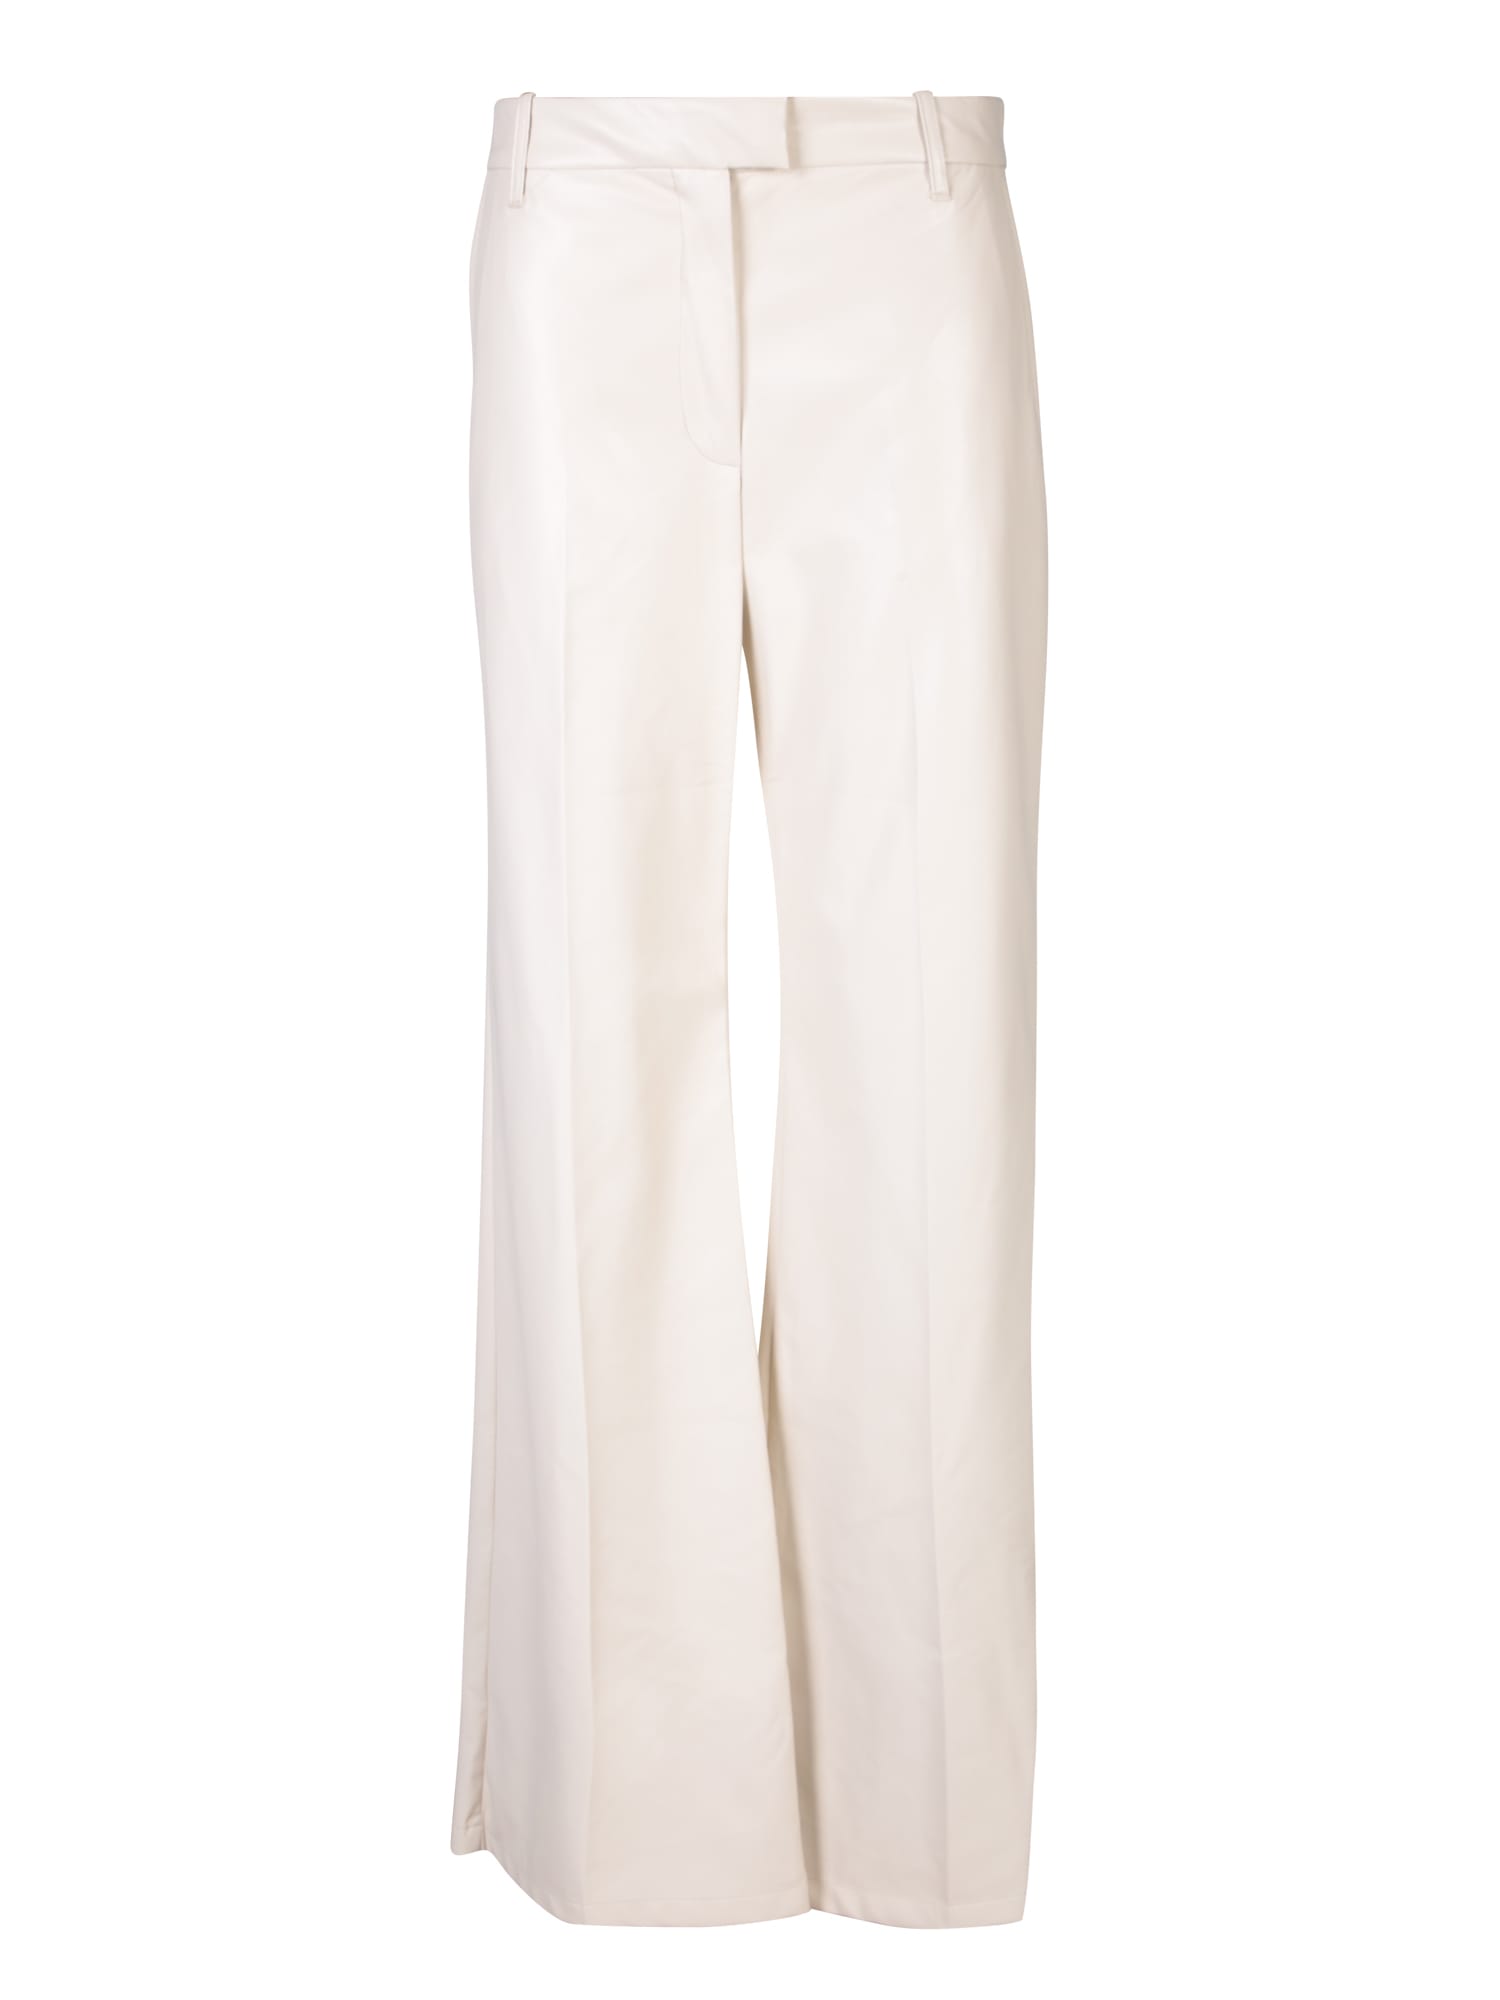 Ivory Faux Leather Flare Pants